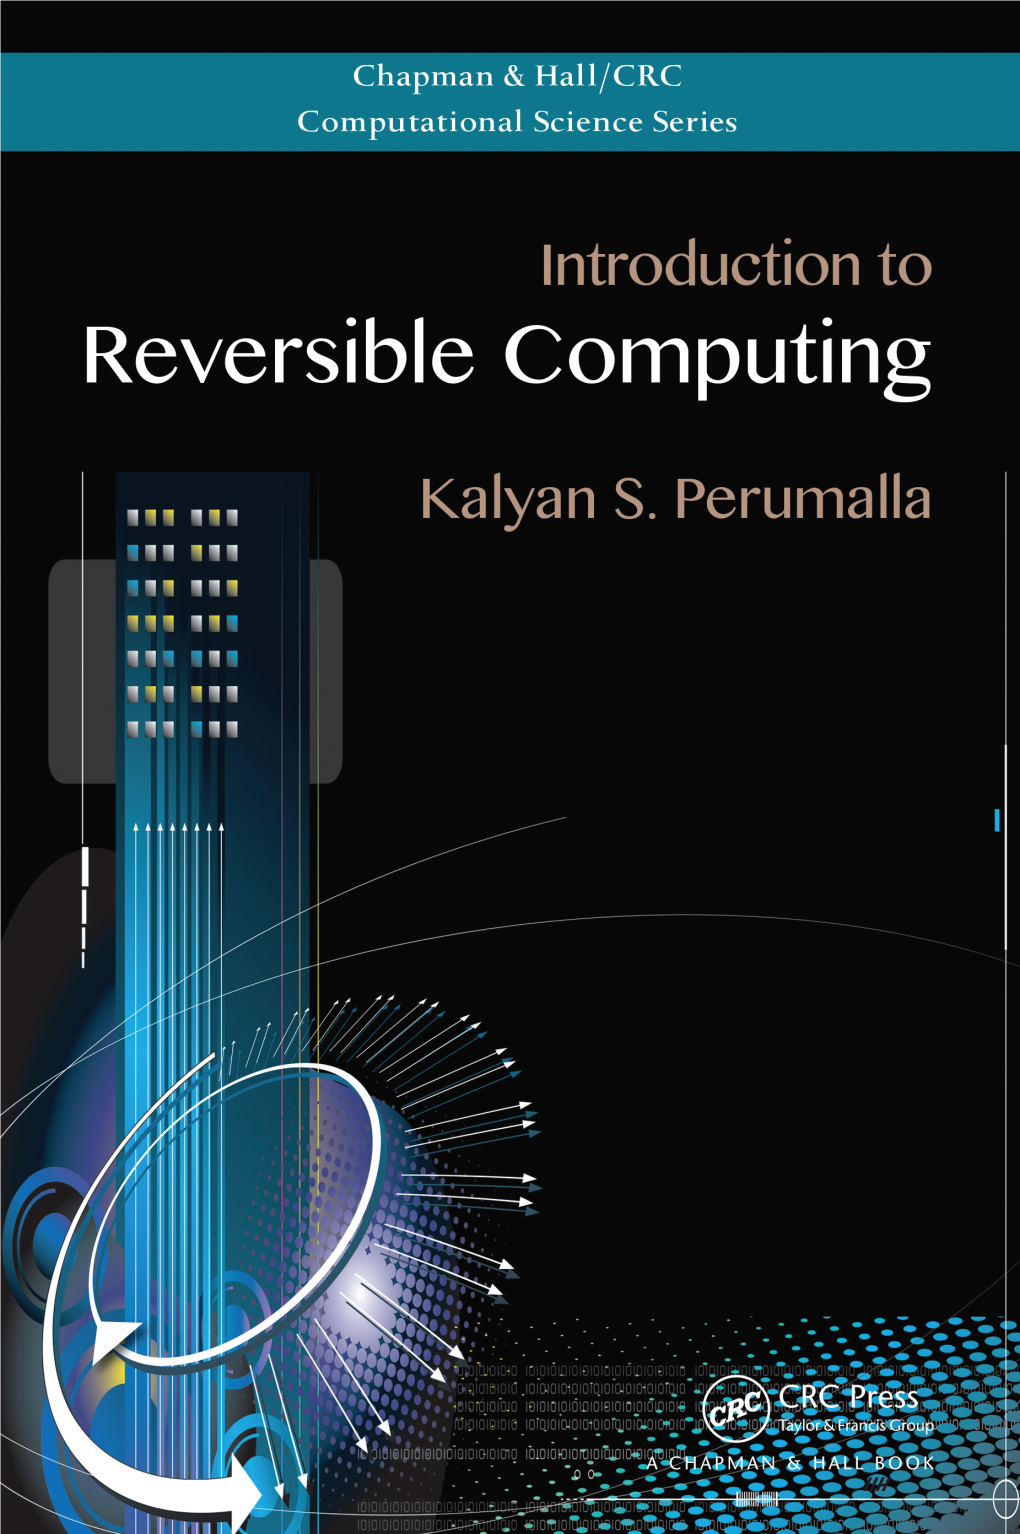 Introduction to Reversible Computing Chapman & Hall/CRC Computational Science Series